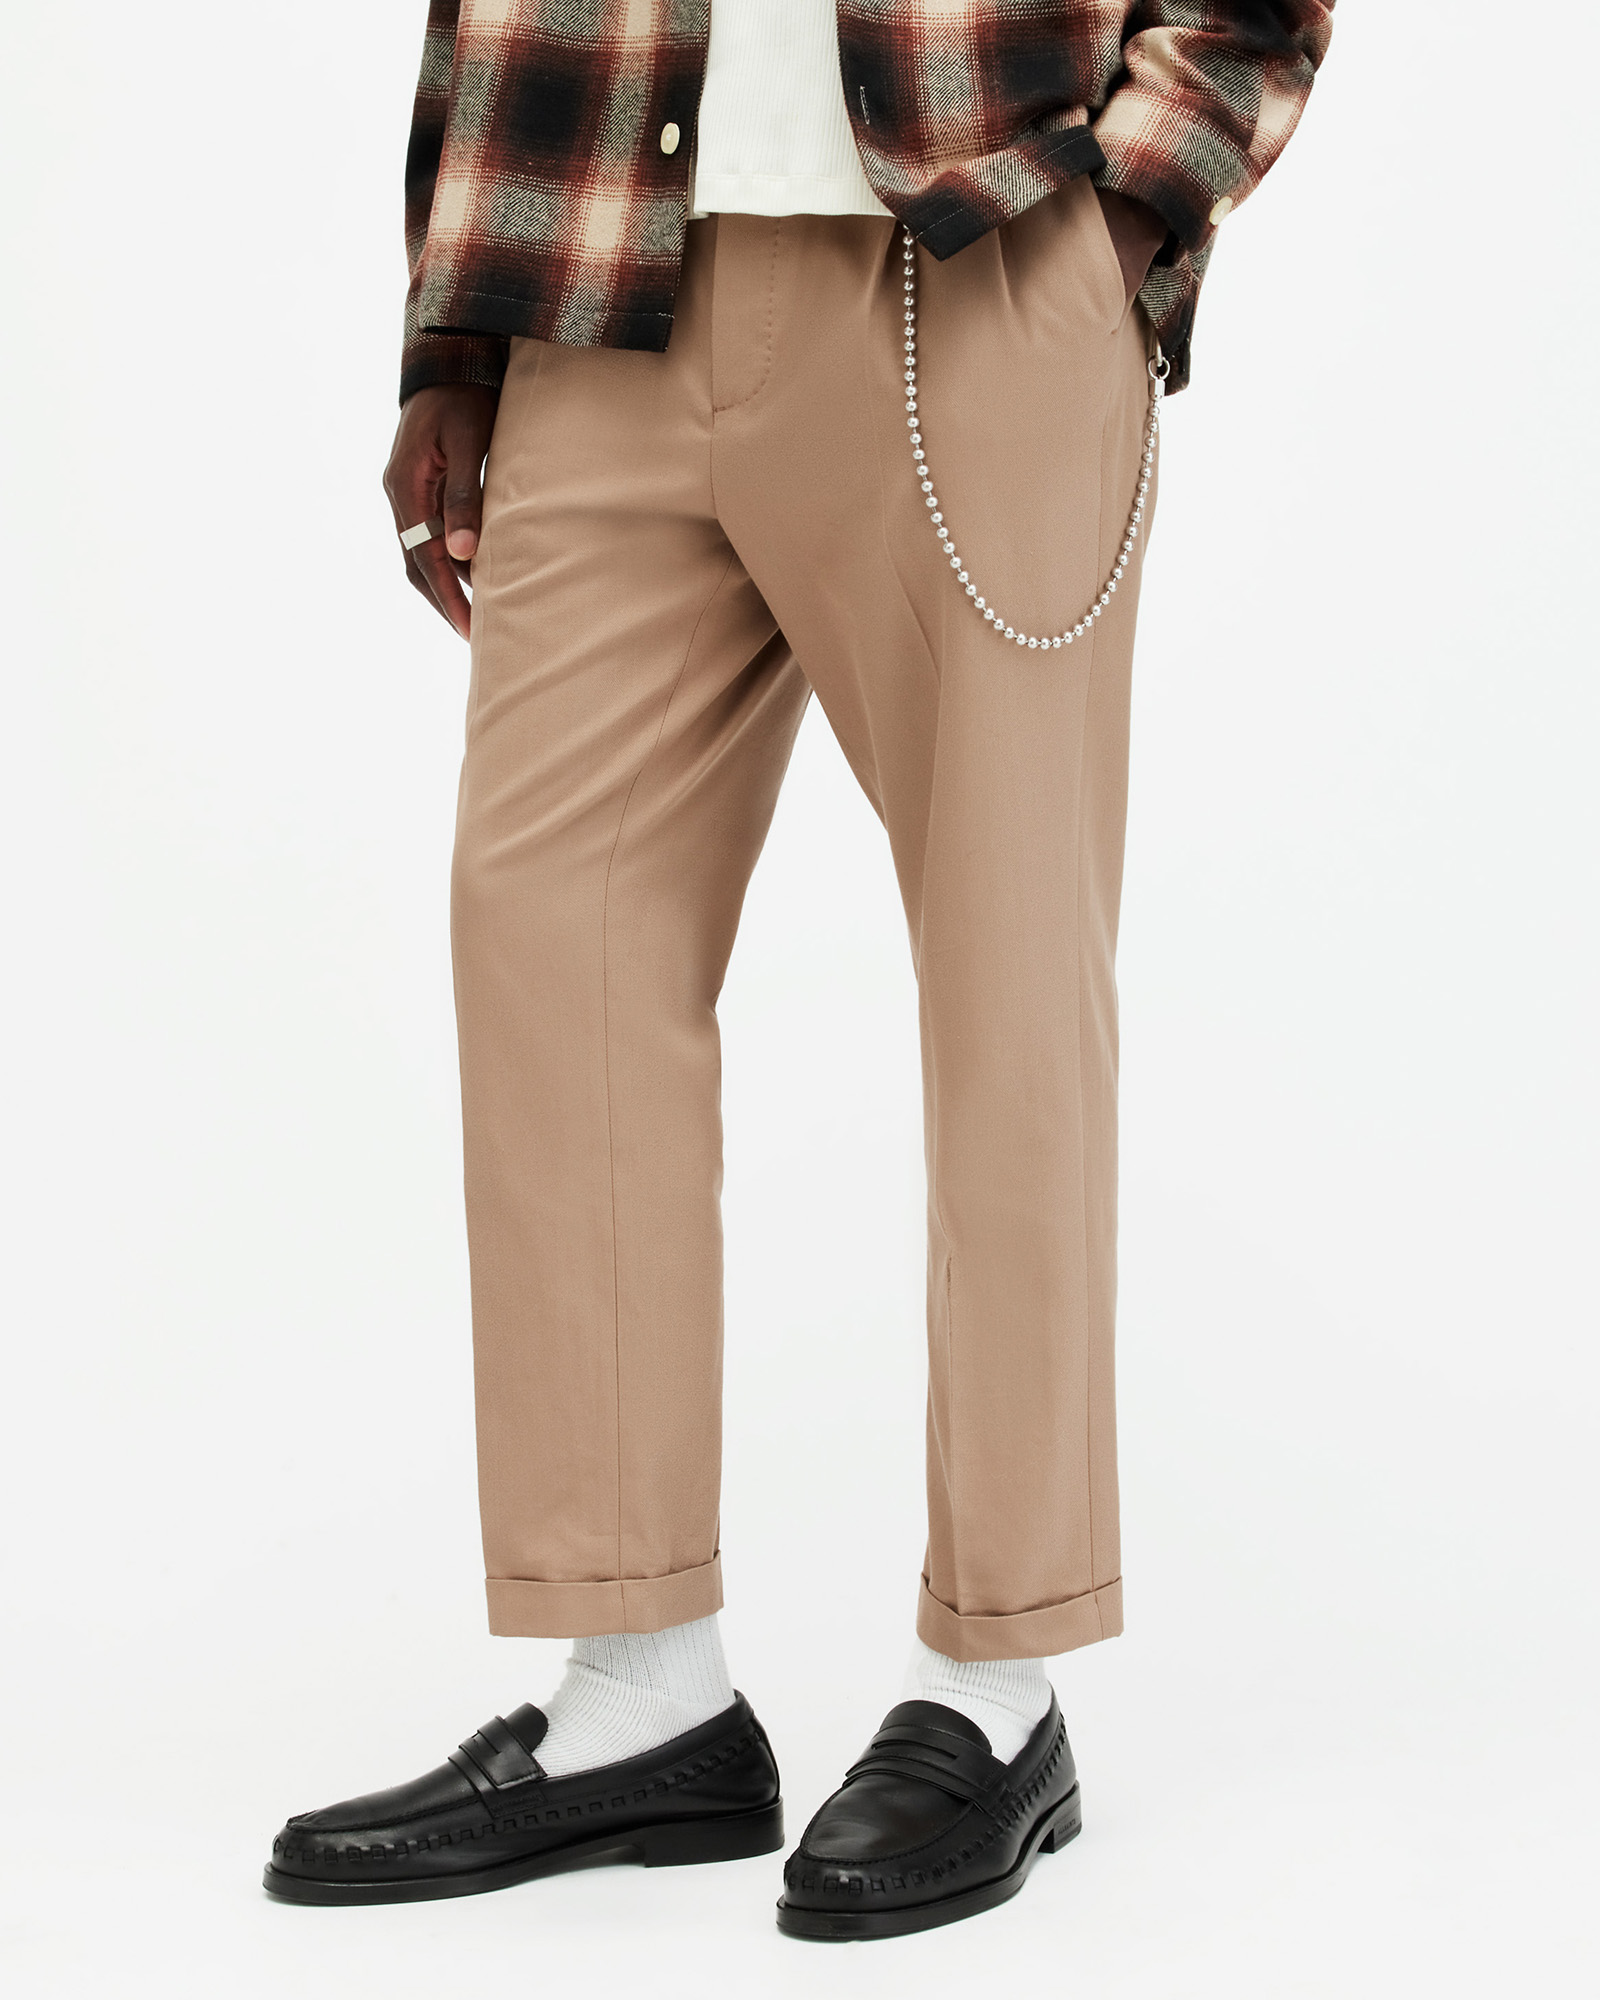 AllSaints Tallis Slim Fit Cropped Tapered Trousers,, TOFFEE TAUPE